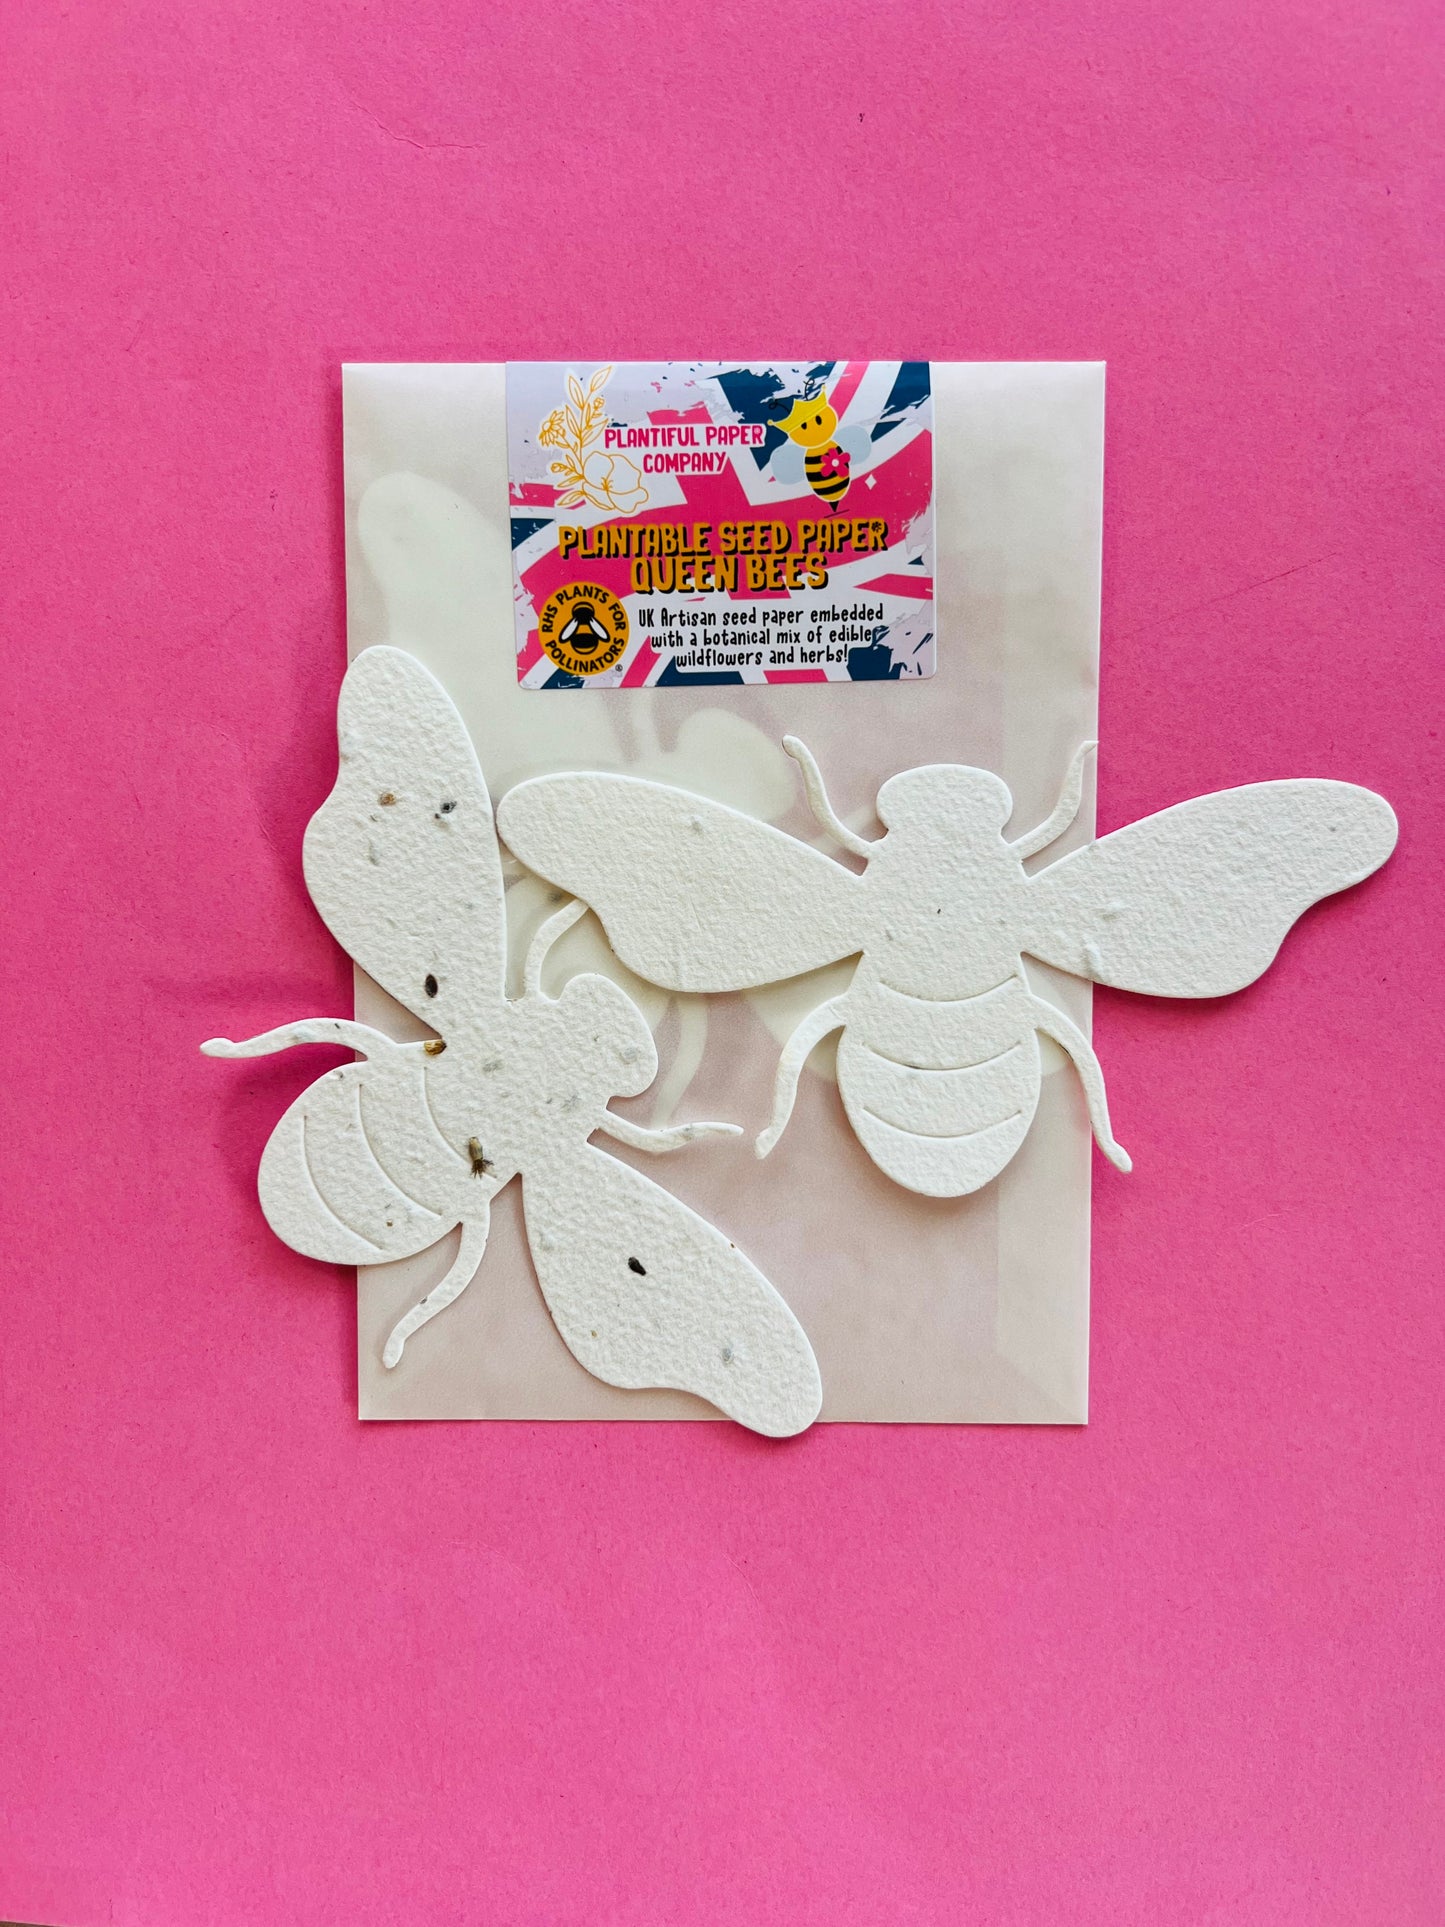 Plantable Seed Paper Queen Bees